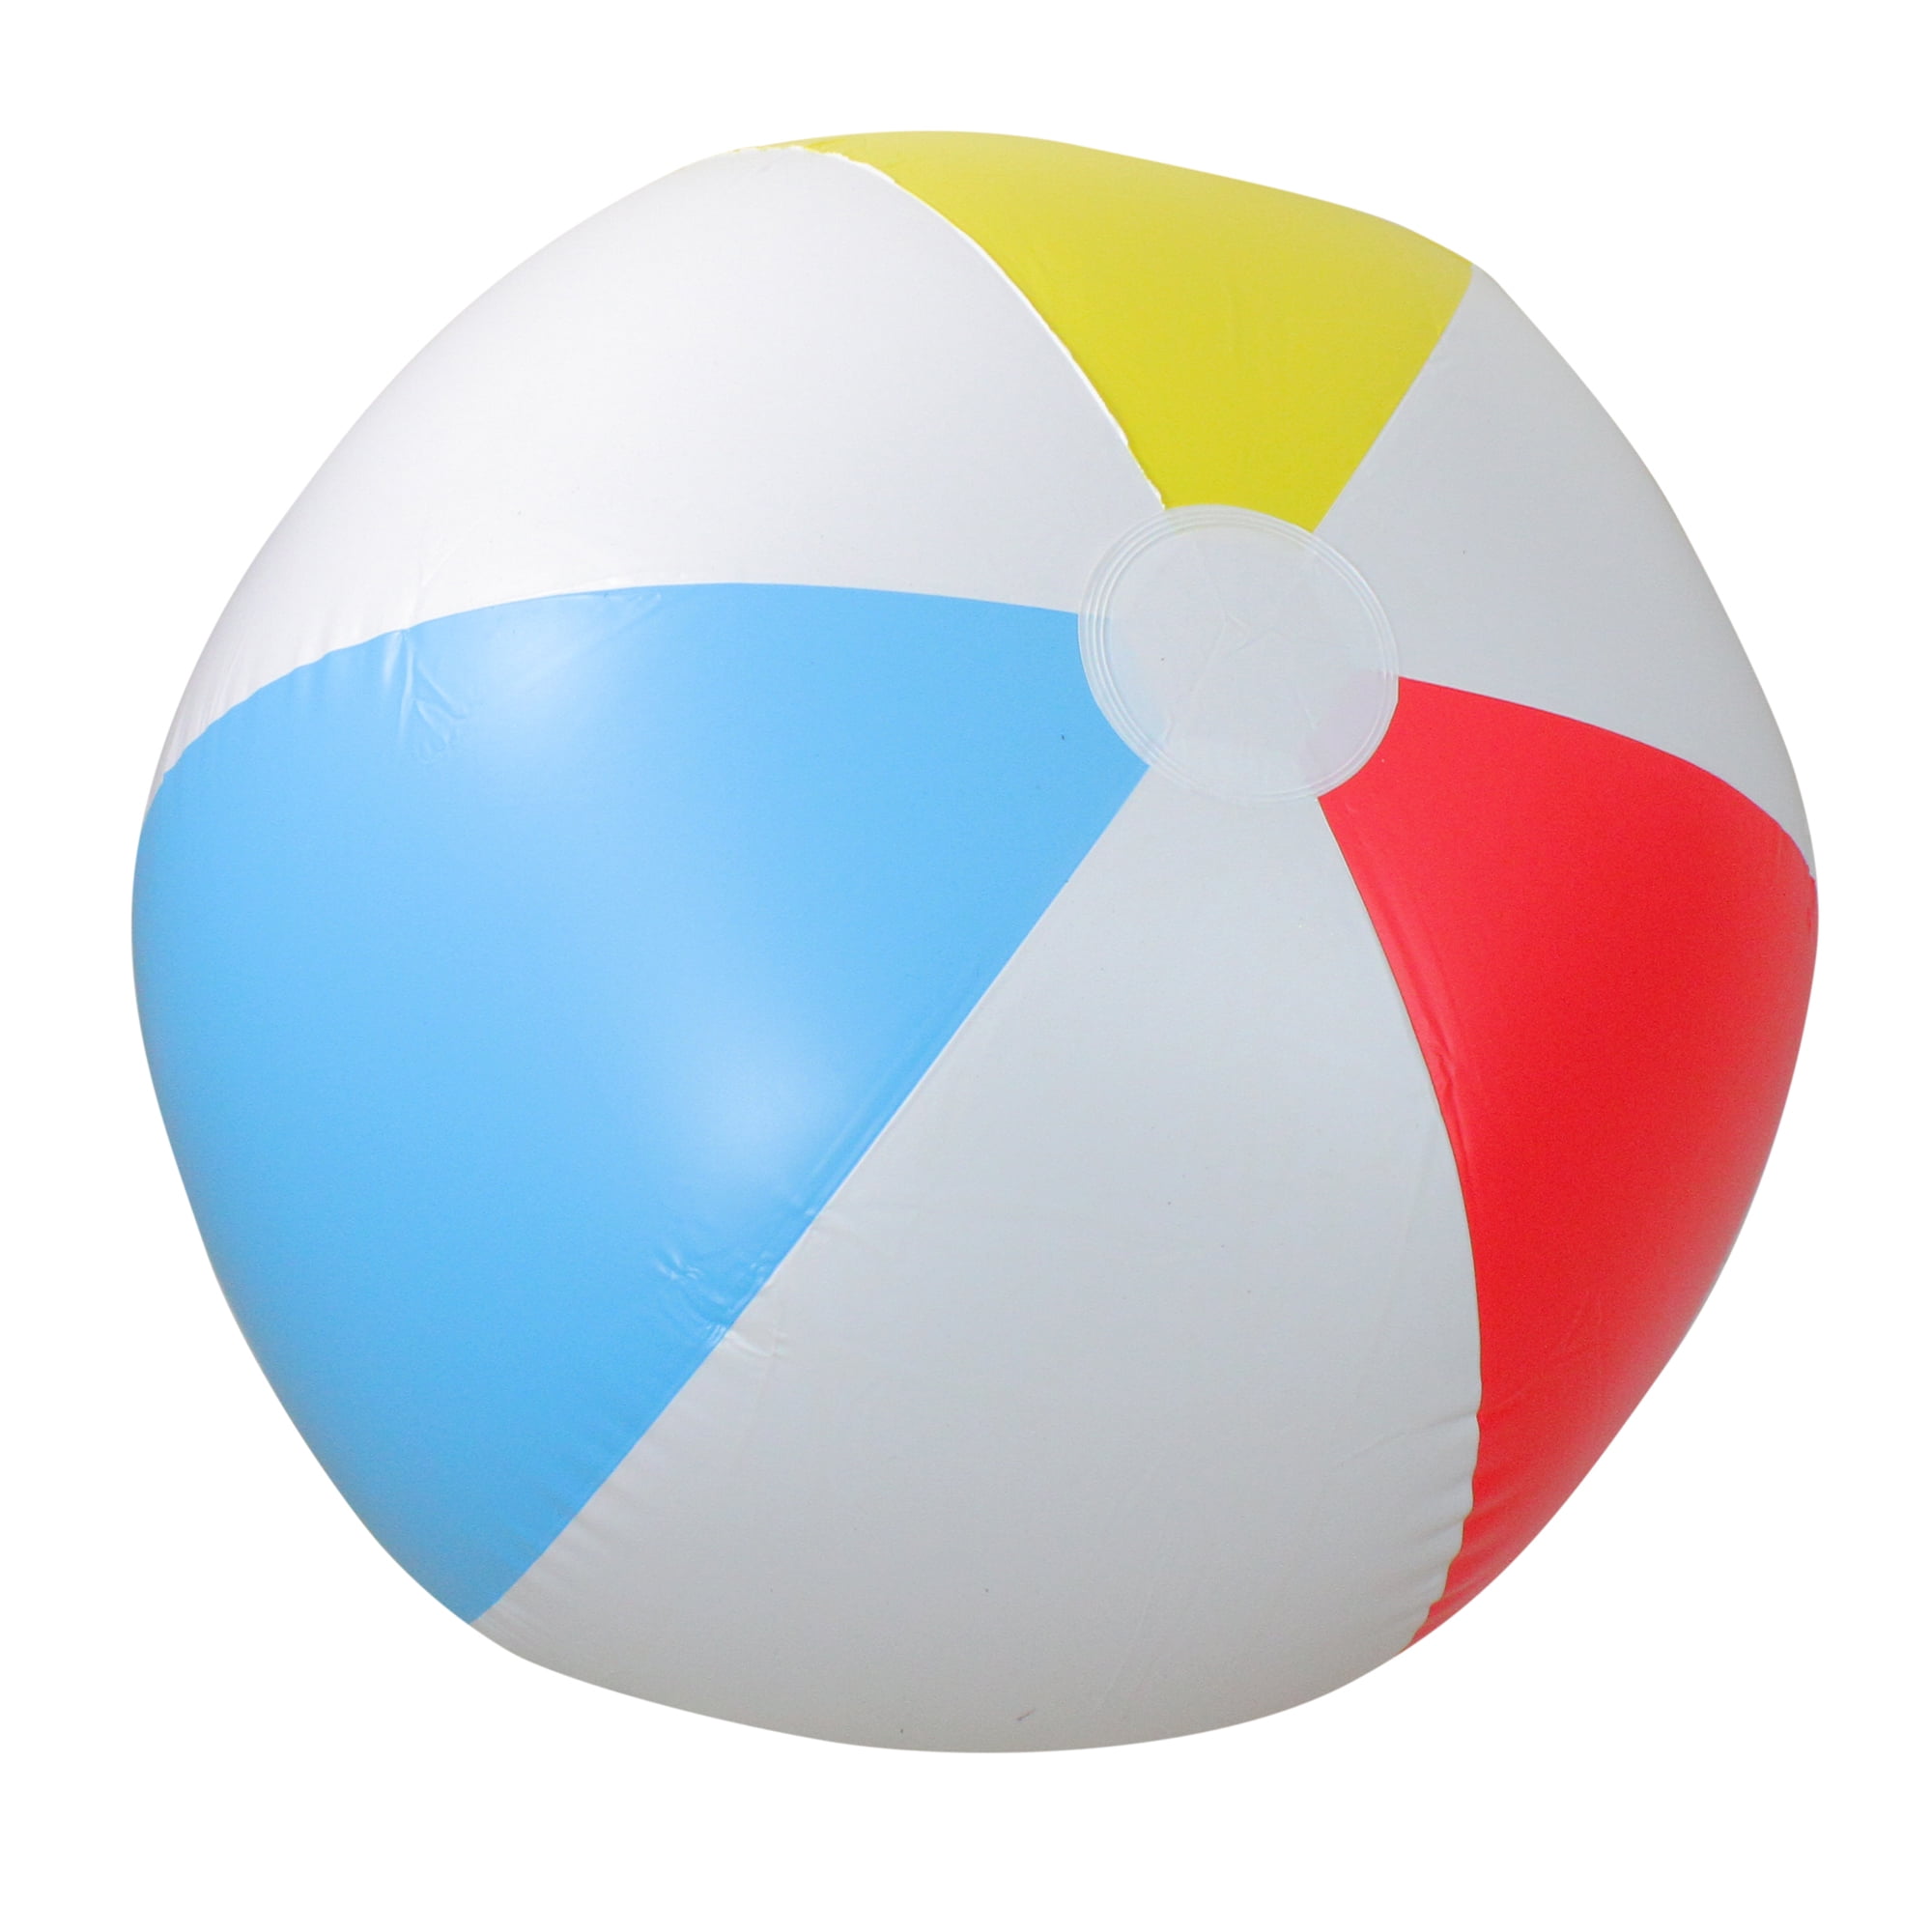 36" Inflatable 6 COLOR Beach Ball Glossy Vinyl Fun Pool Toy & Party Decoration 